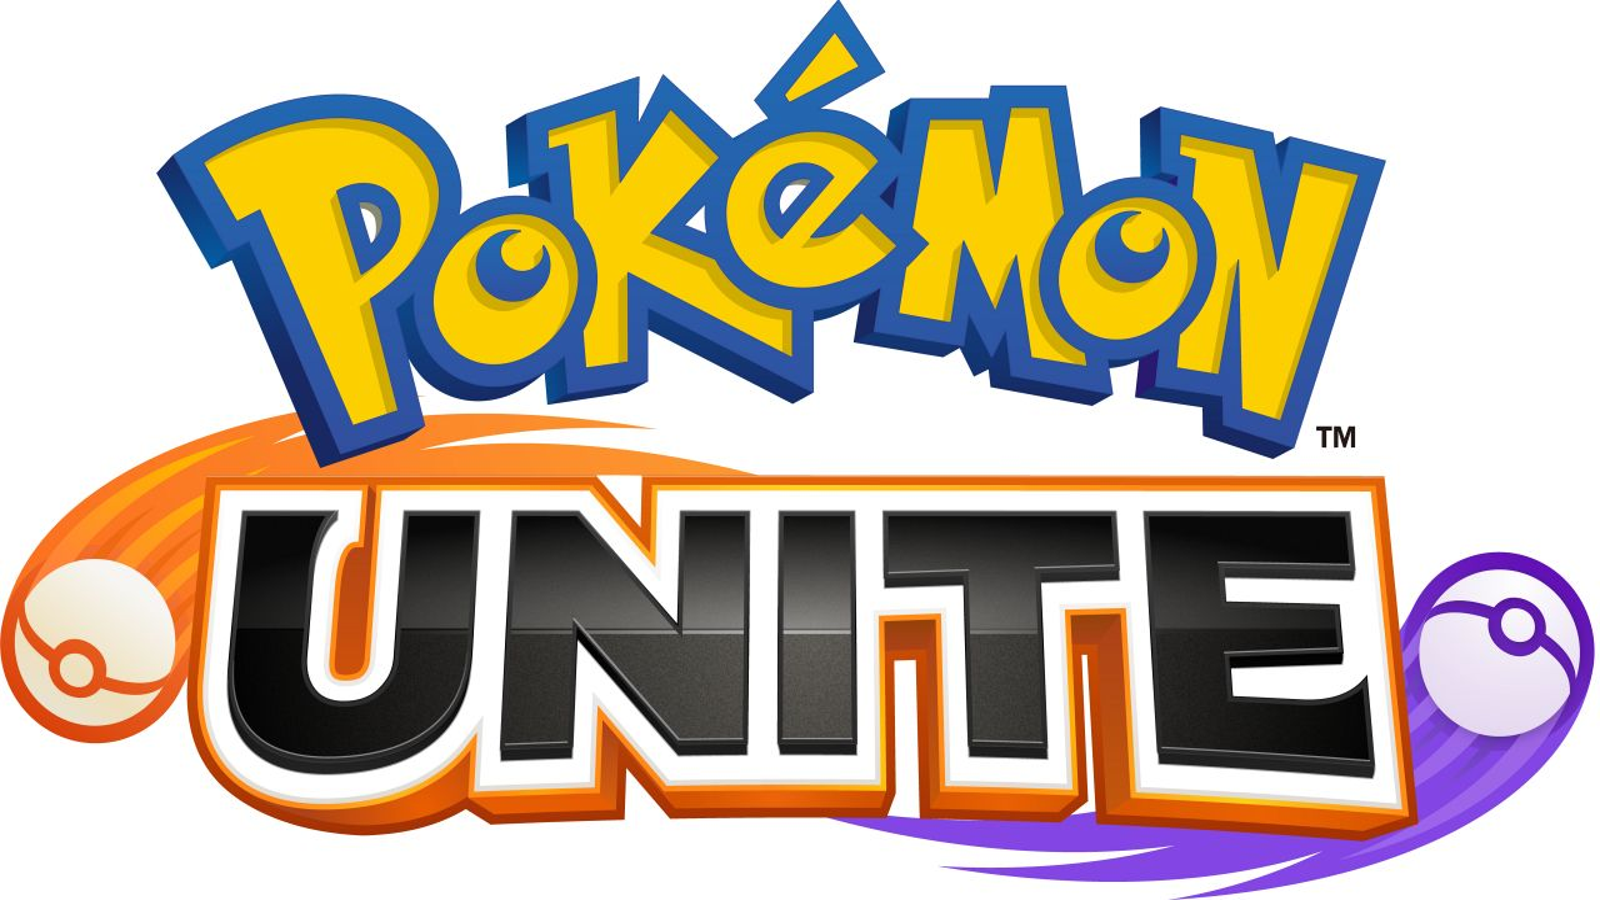 Pokemon UNITE launches on iOS and Android tomorrow - My Nintendo News